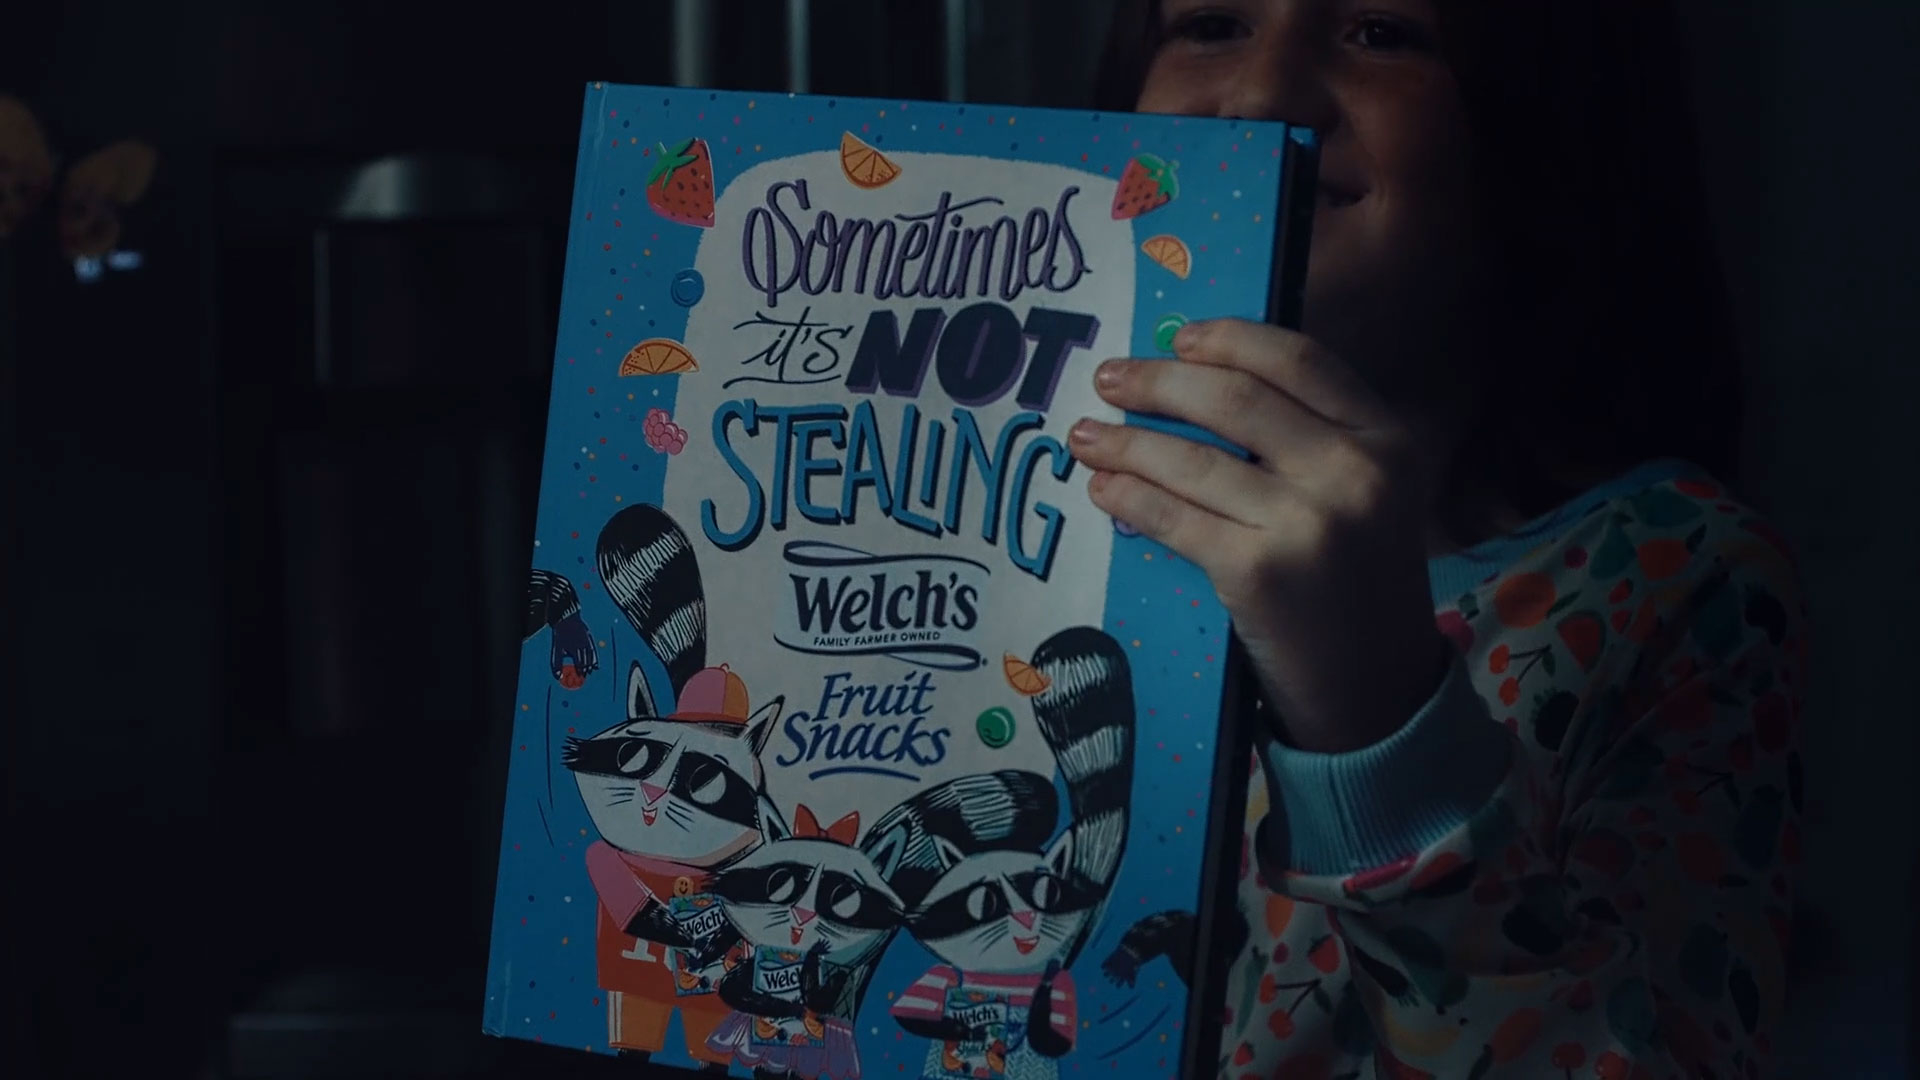 Welch's® Fruit Snacks Releases New Storybook: Sometimes It's Not Stealing